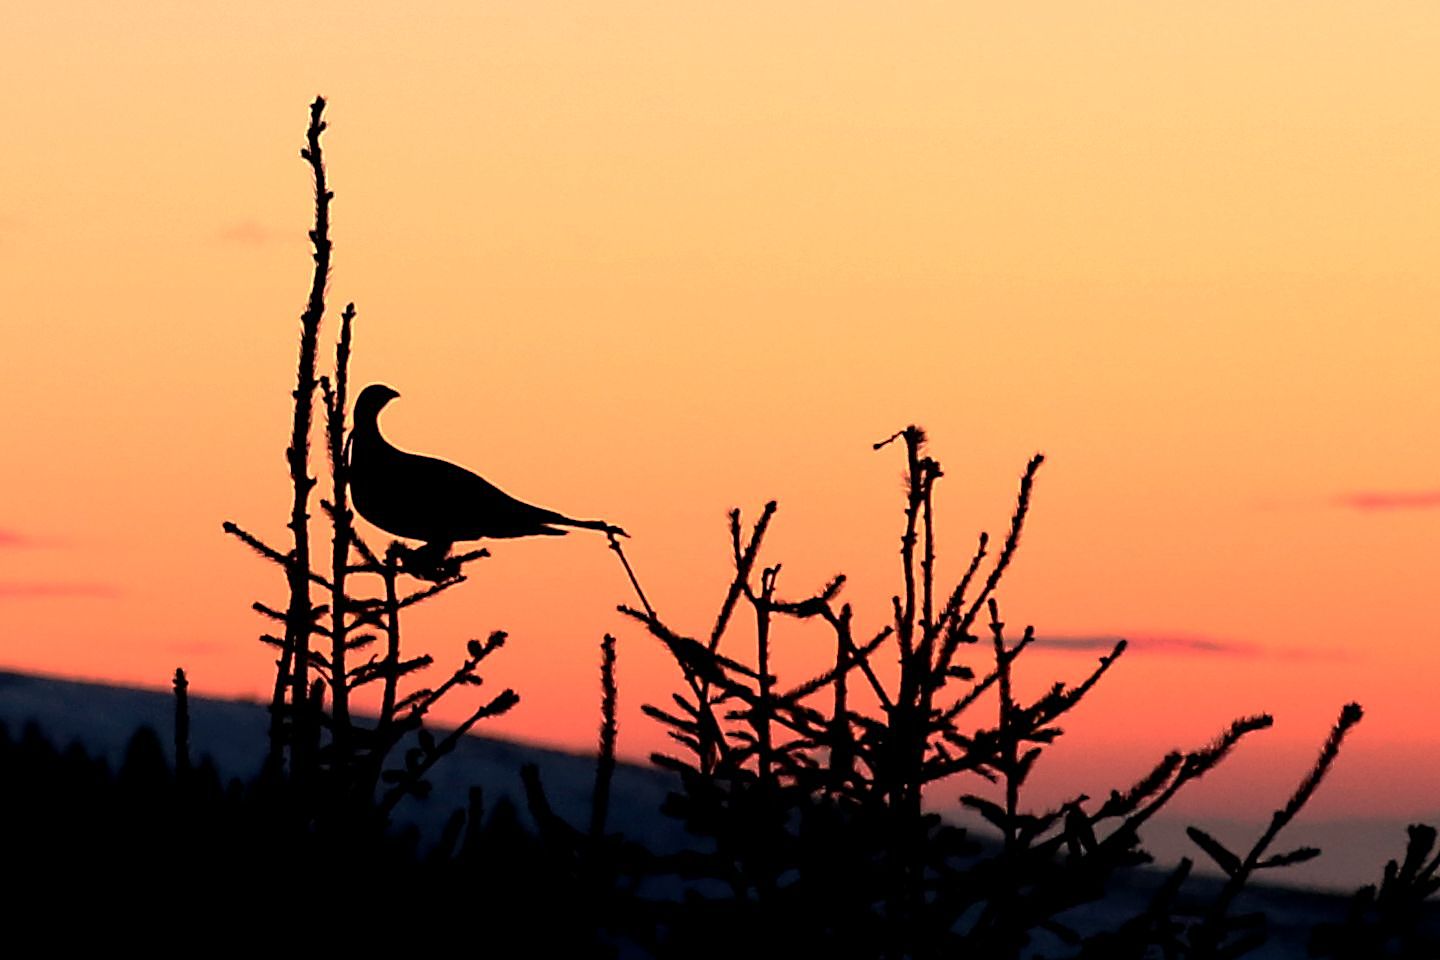 grouse at sunset 2...